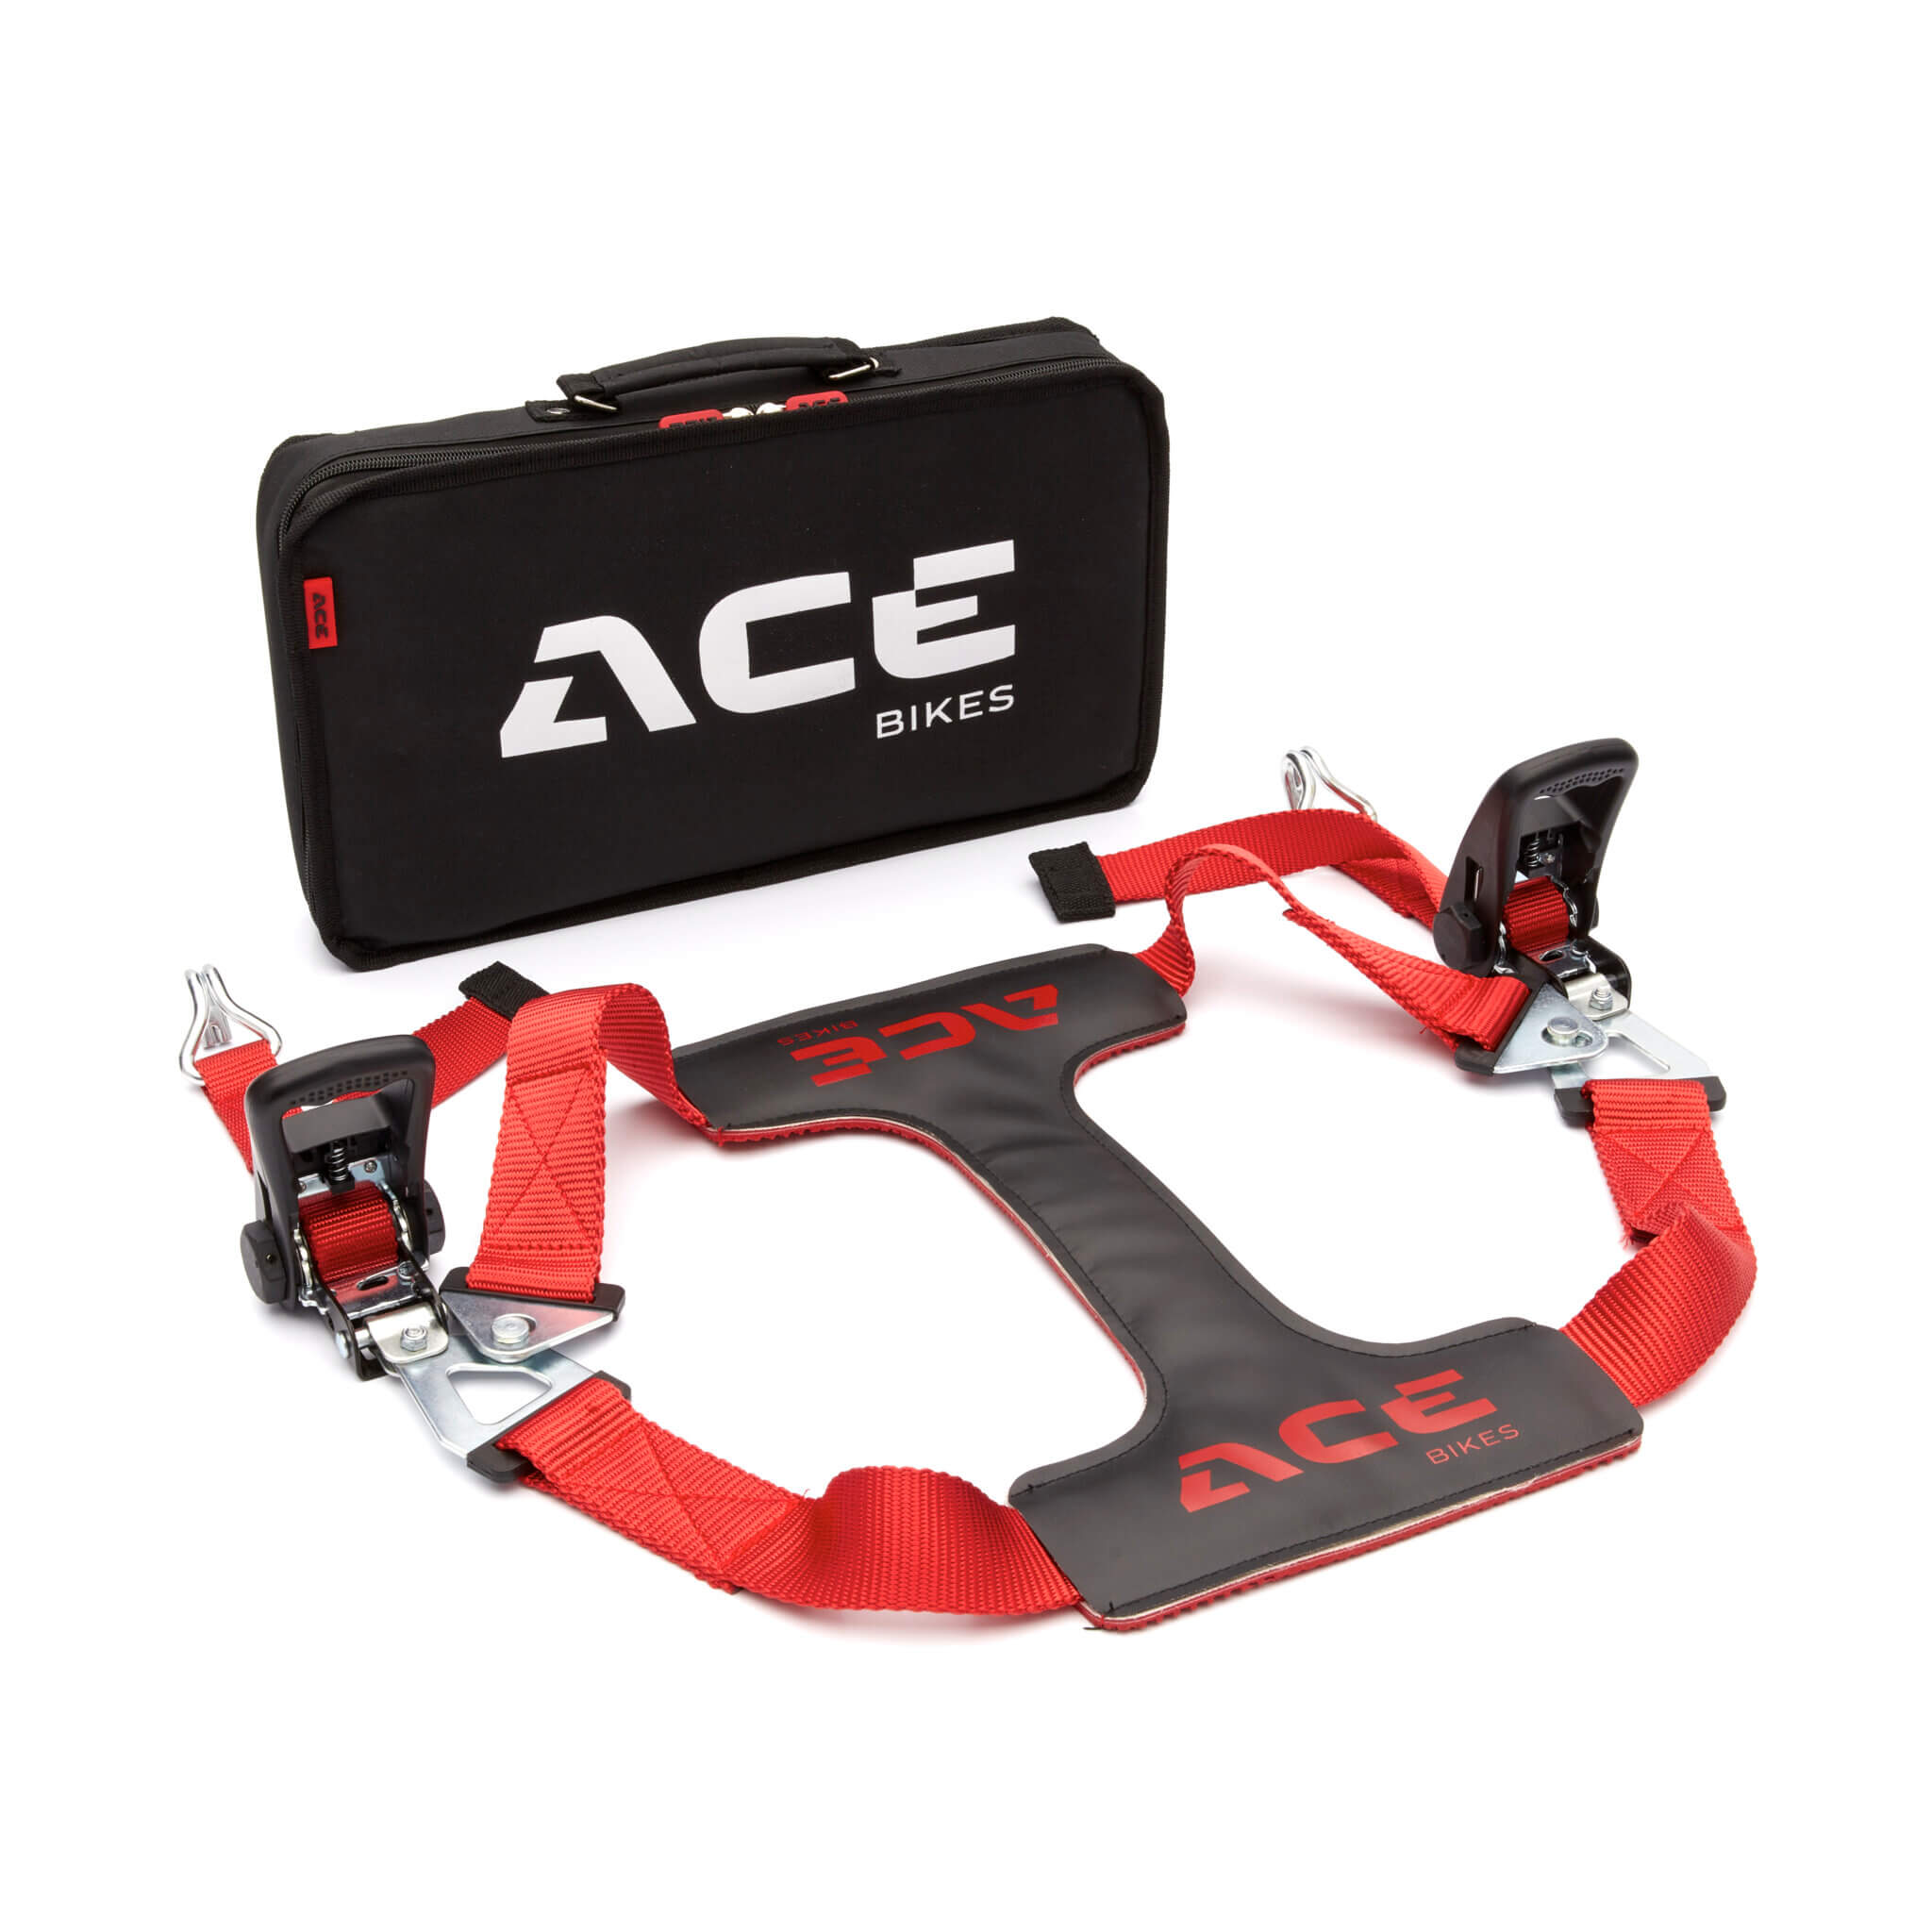 Buckle-Up - Acebikes - Transport Solutions - Motorcycle Lashing